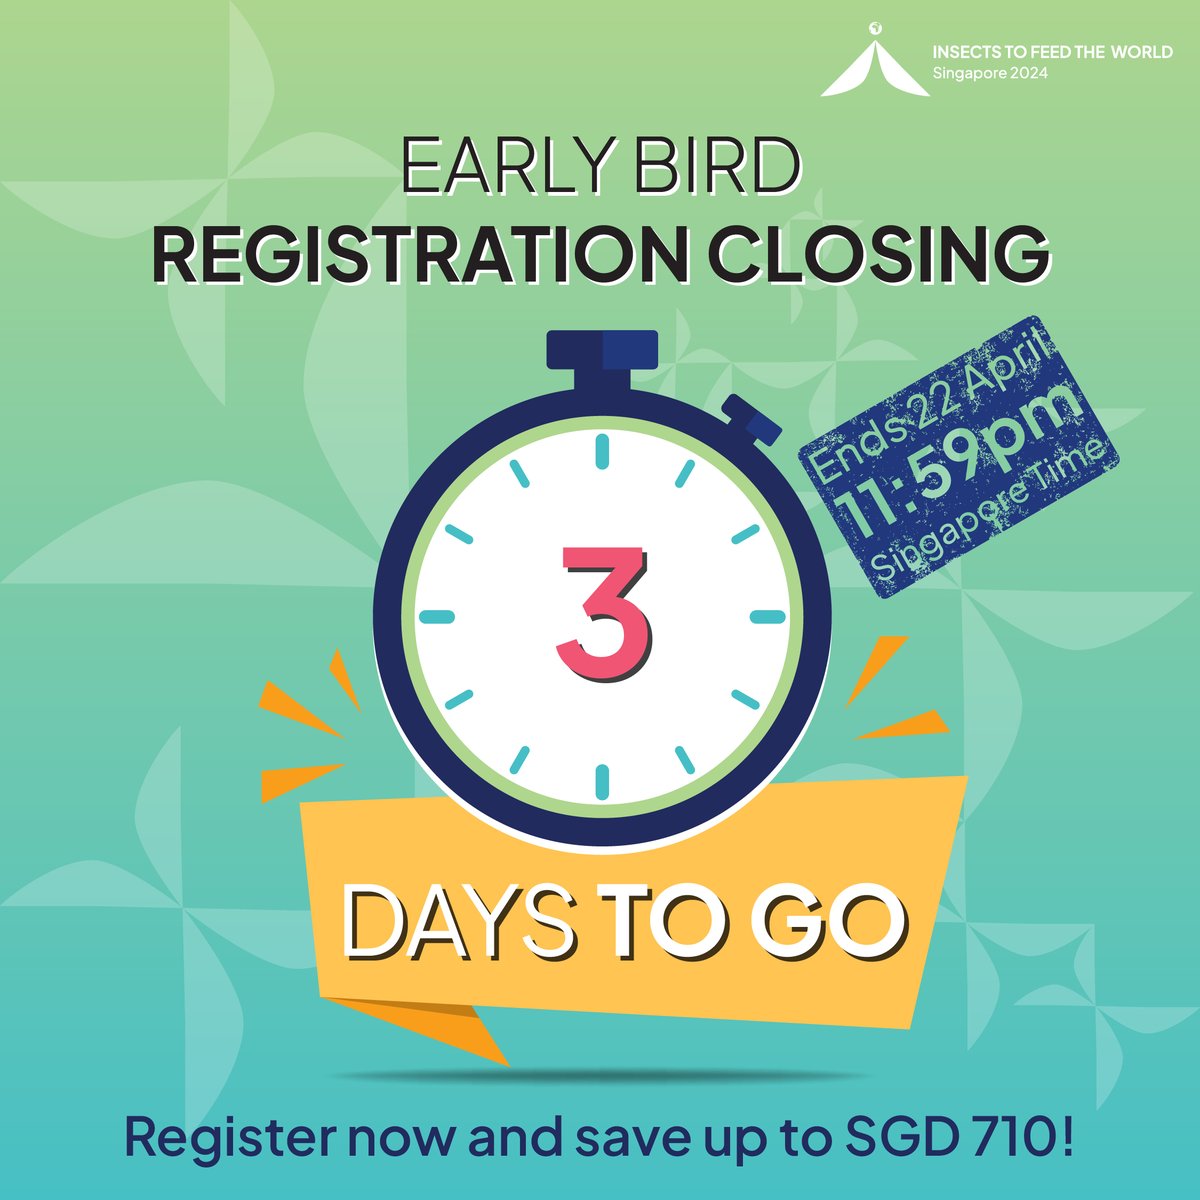 Just 3 days left to grab your early bird tickets! Register now before it's too late!
➡bit.ly/47C8TXa

#IFW2024 #Insects #Conference #BSF #mealworm #cricket #silkwork #alternativeProtein #sustainability #earlybirdspecial #RegisterNow